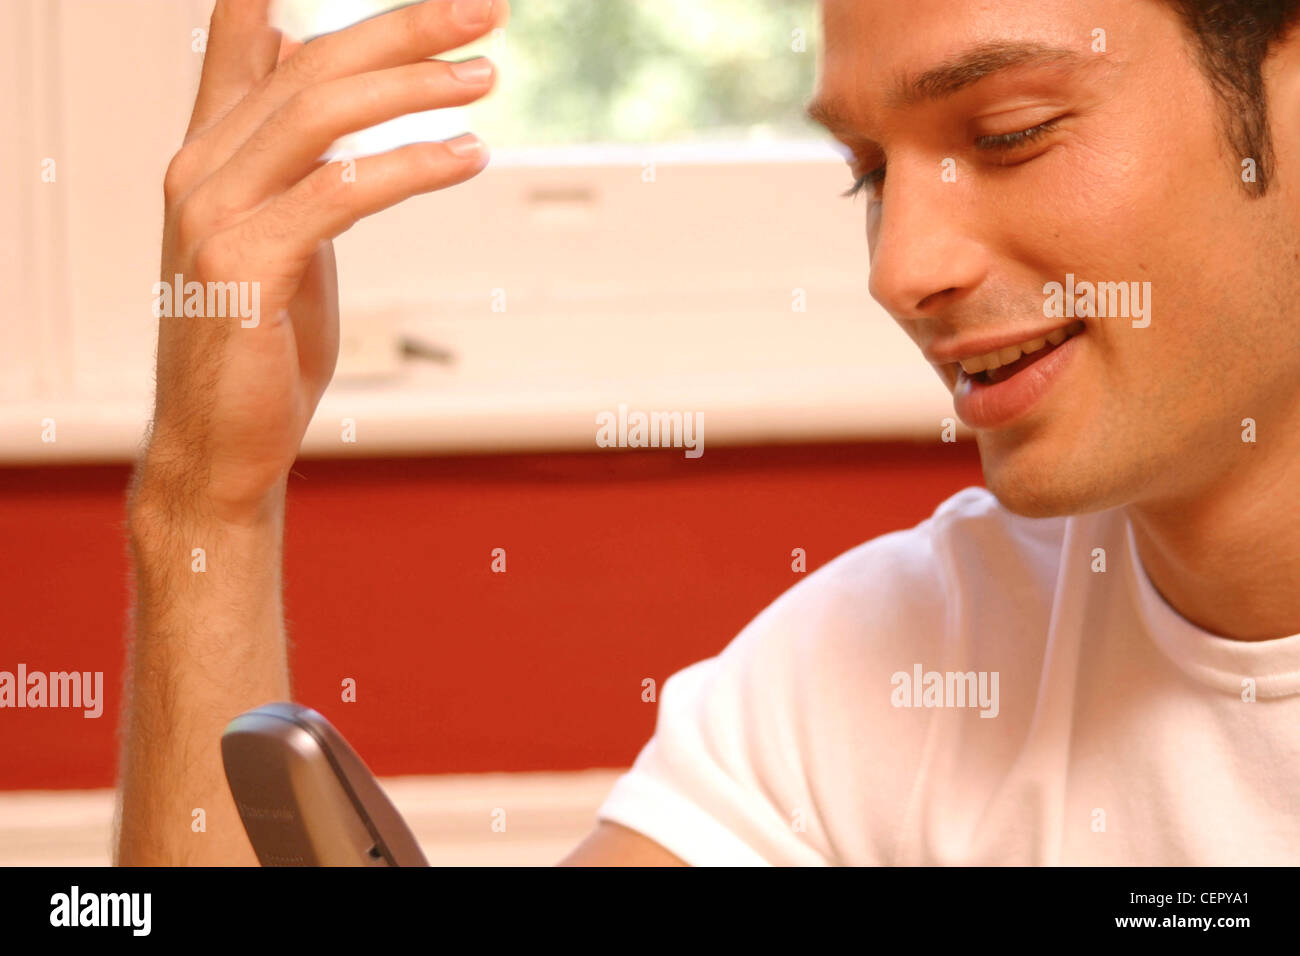 Cropped semi profile of male dark curly hair wearing white t shirt sitting looking at mobile phone one hand raised smiling Stock Photo